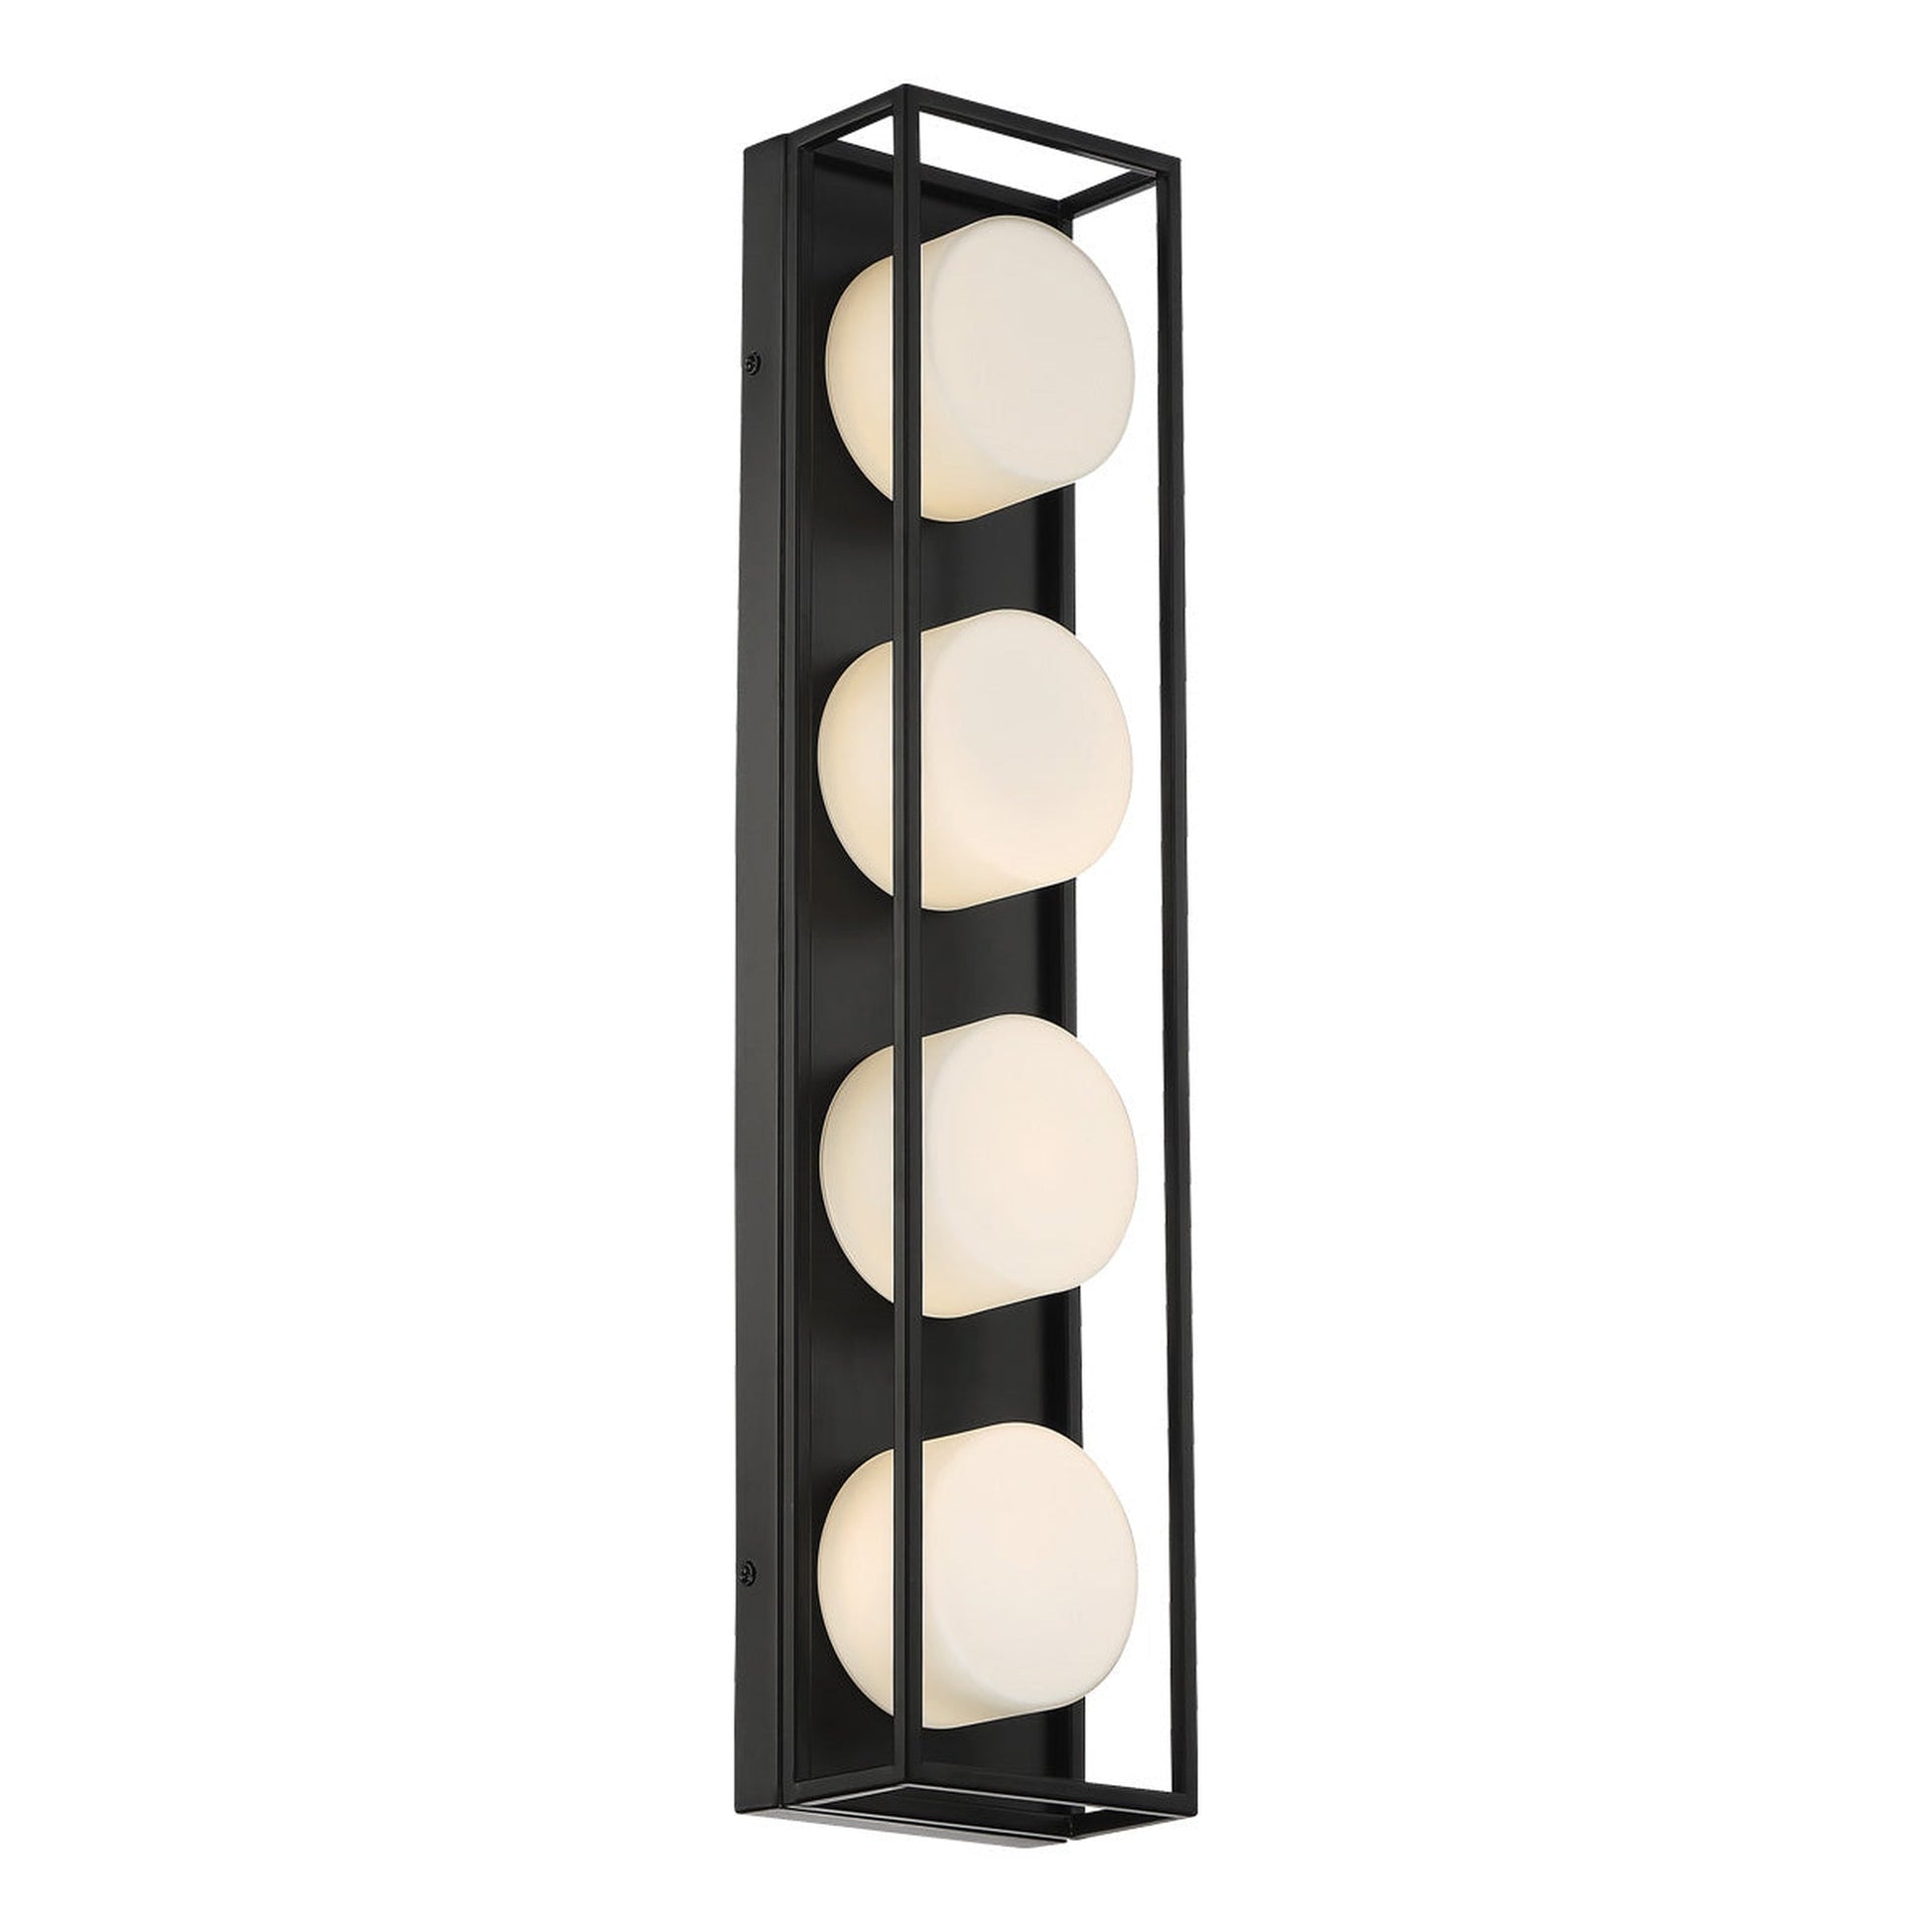 Eurofase Lighting Rover 24" 4-Light Dimmable Integrated LED Black Bath Bar With Opal Glass Shades